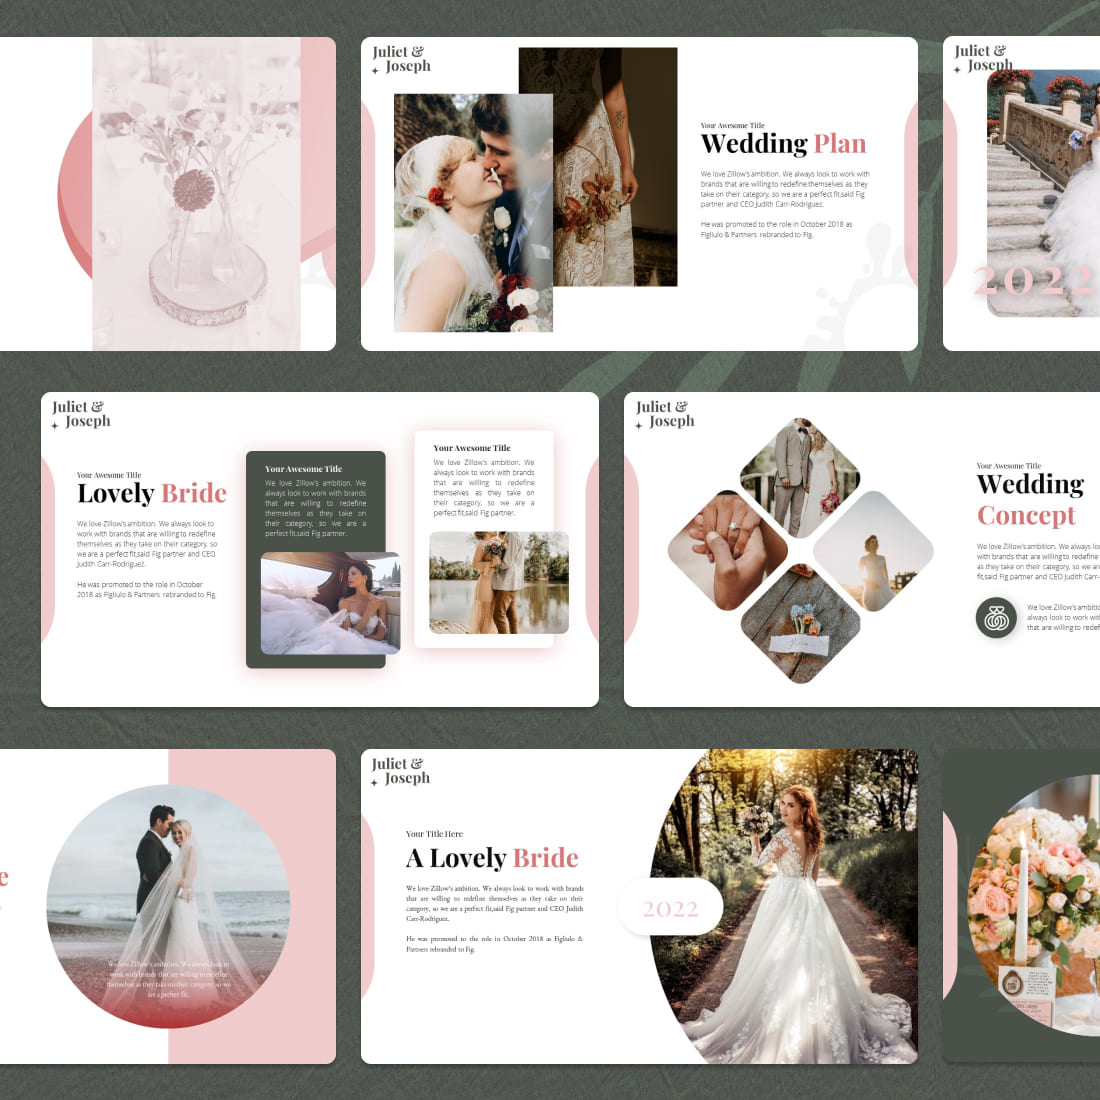 Wedding Place Presentation Template cover.